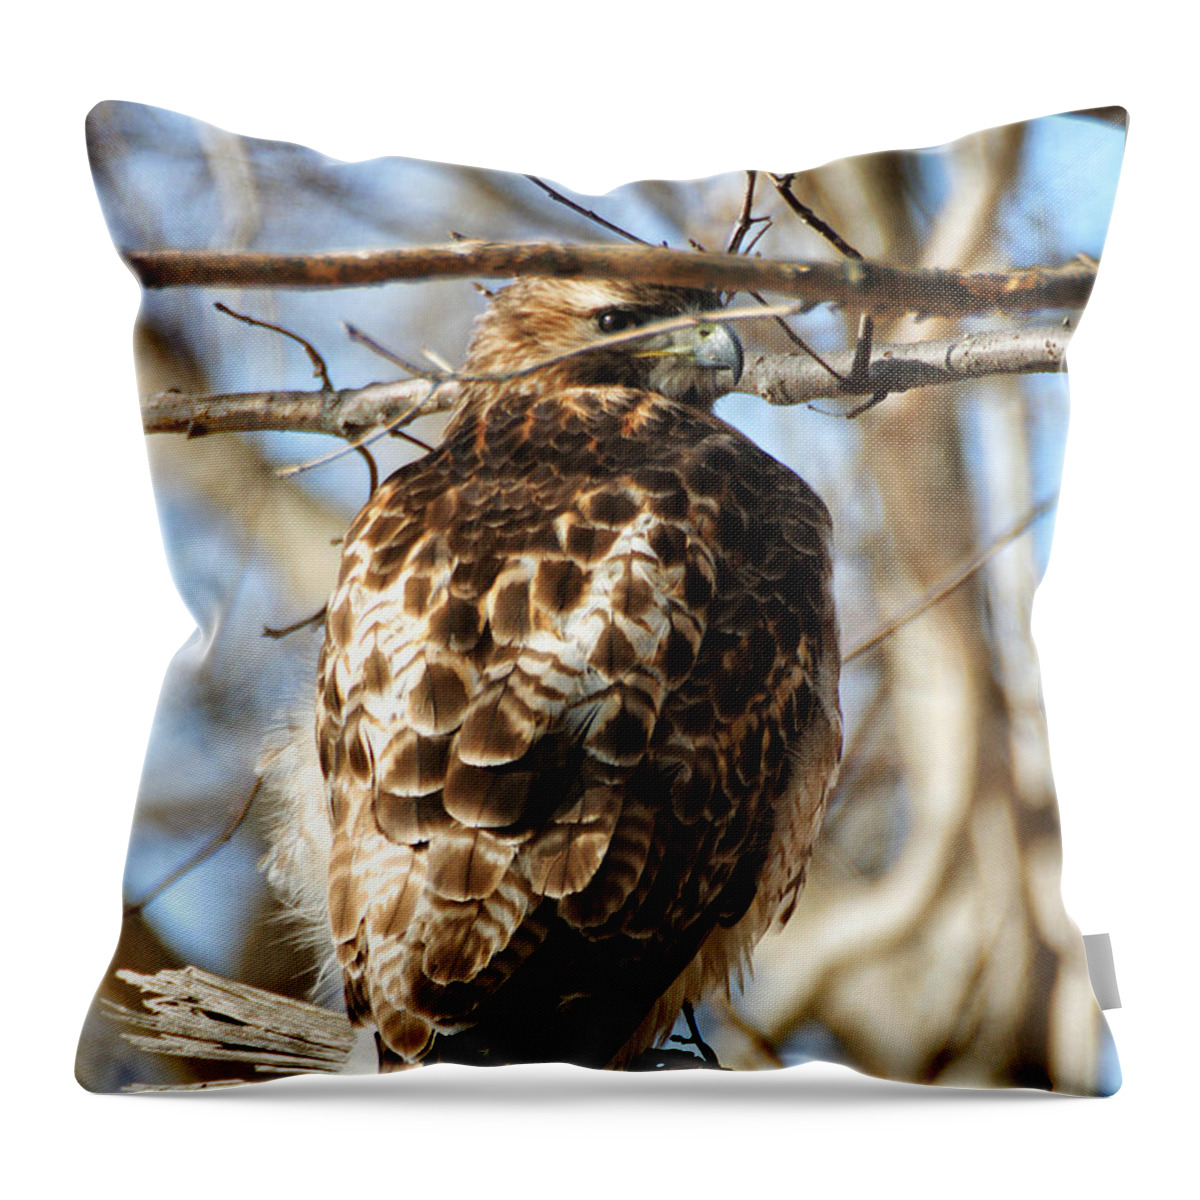 Wildlife Throw Pillow featuring the photograph Peeking Through the Branches by William Selander